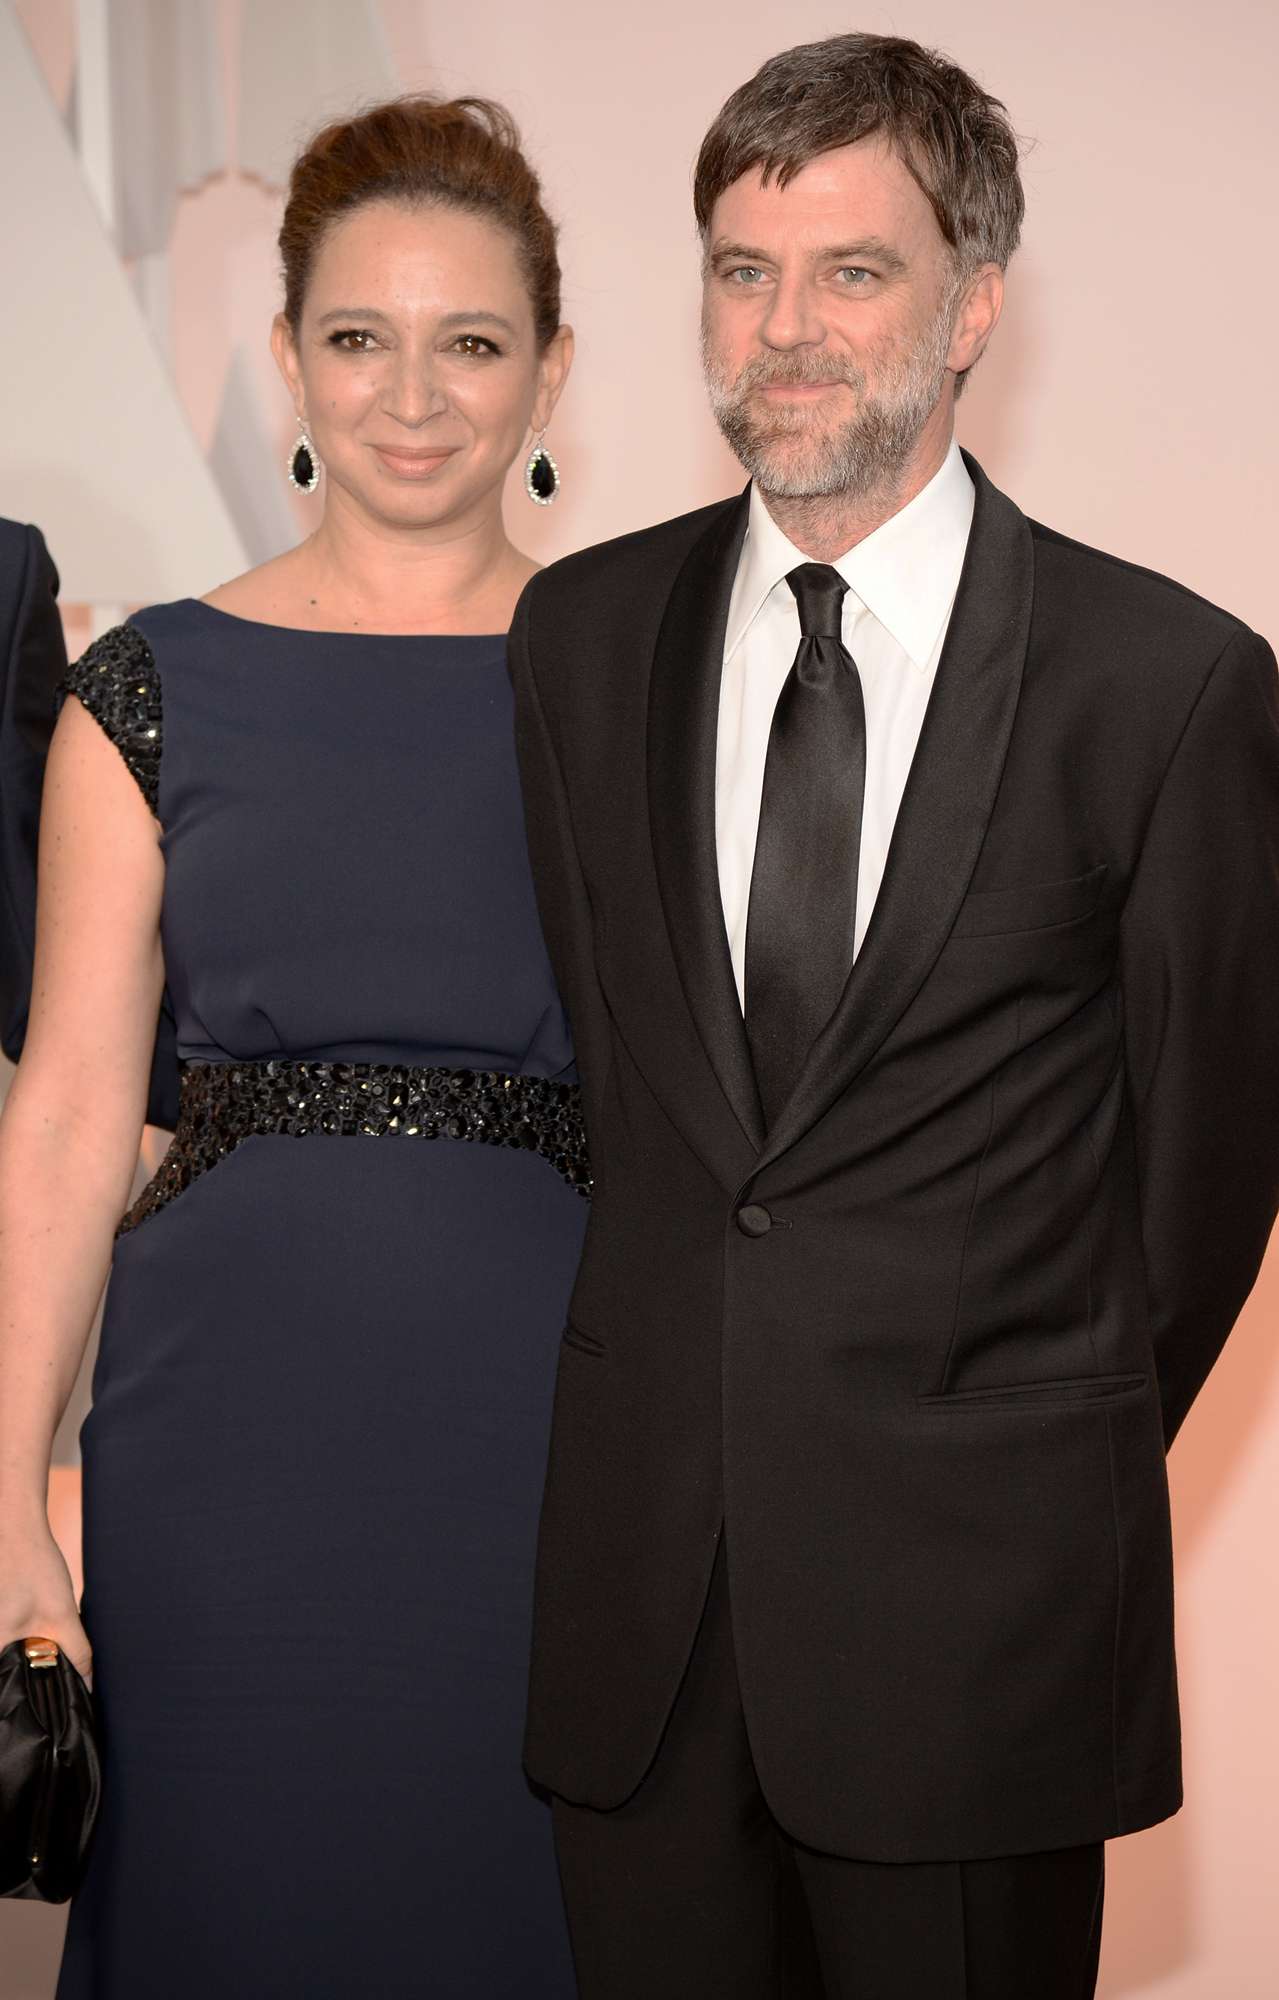 Maya Rudolph (L) and filmmaker Paul Thomas Anderson attend the 87th Annual Academy Awards at Hollywood & Highland Center on February 22, 2015 in Hollywood, CaliforniaMaya Rudolph (L) and filmmaker Paul Thomas Anderson attend the 87th Annual Academy Awards at Hollywood & Highland Center on February 22, 2015 in Hollywood, California